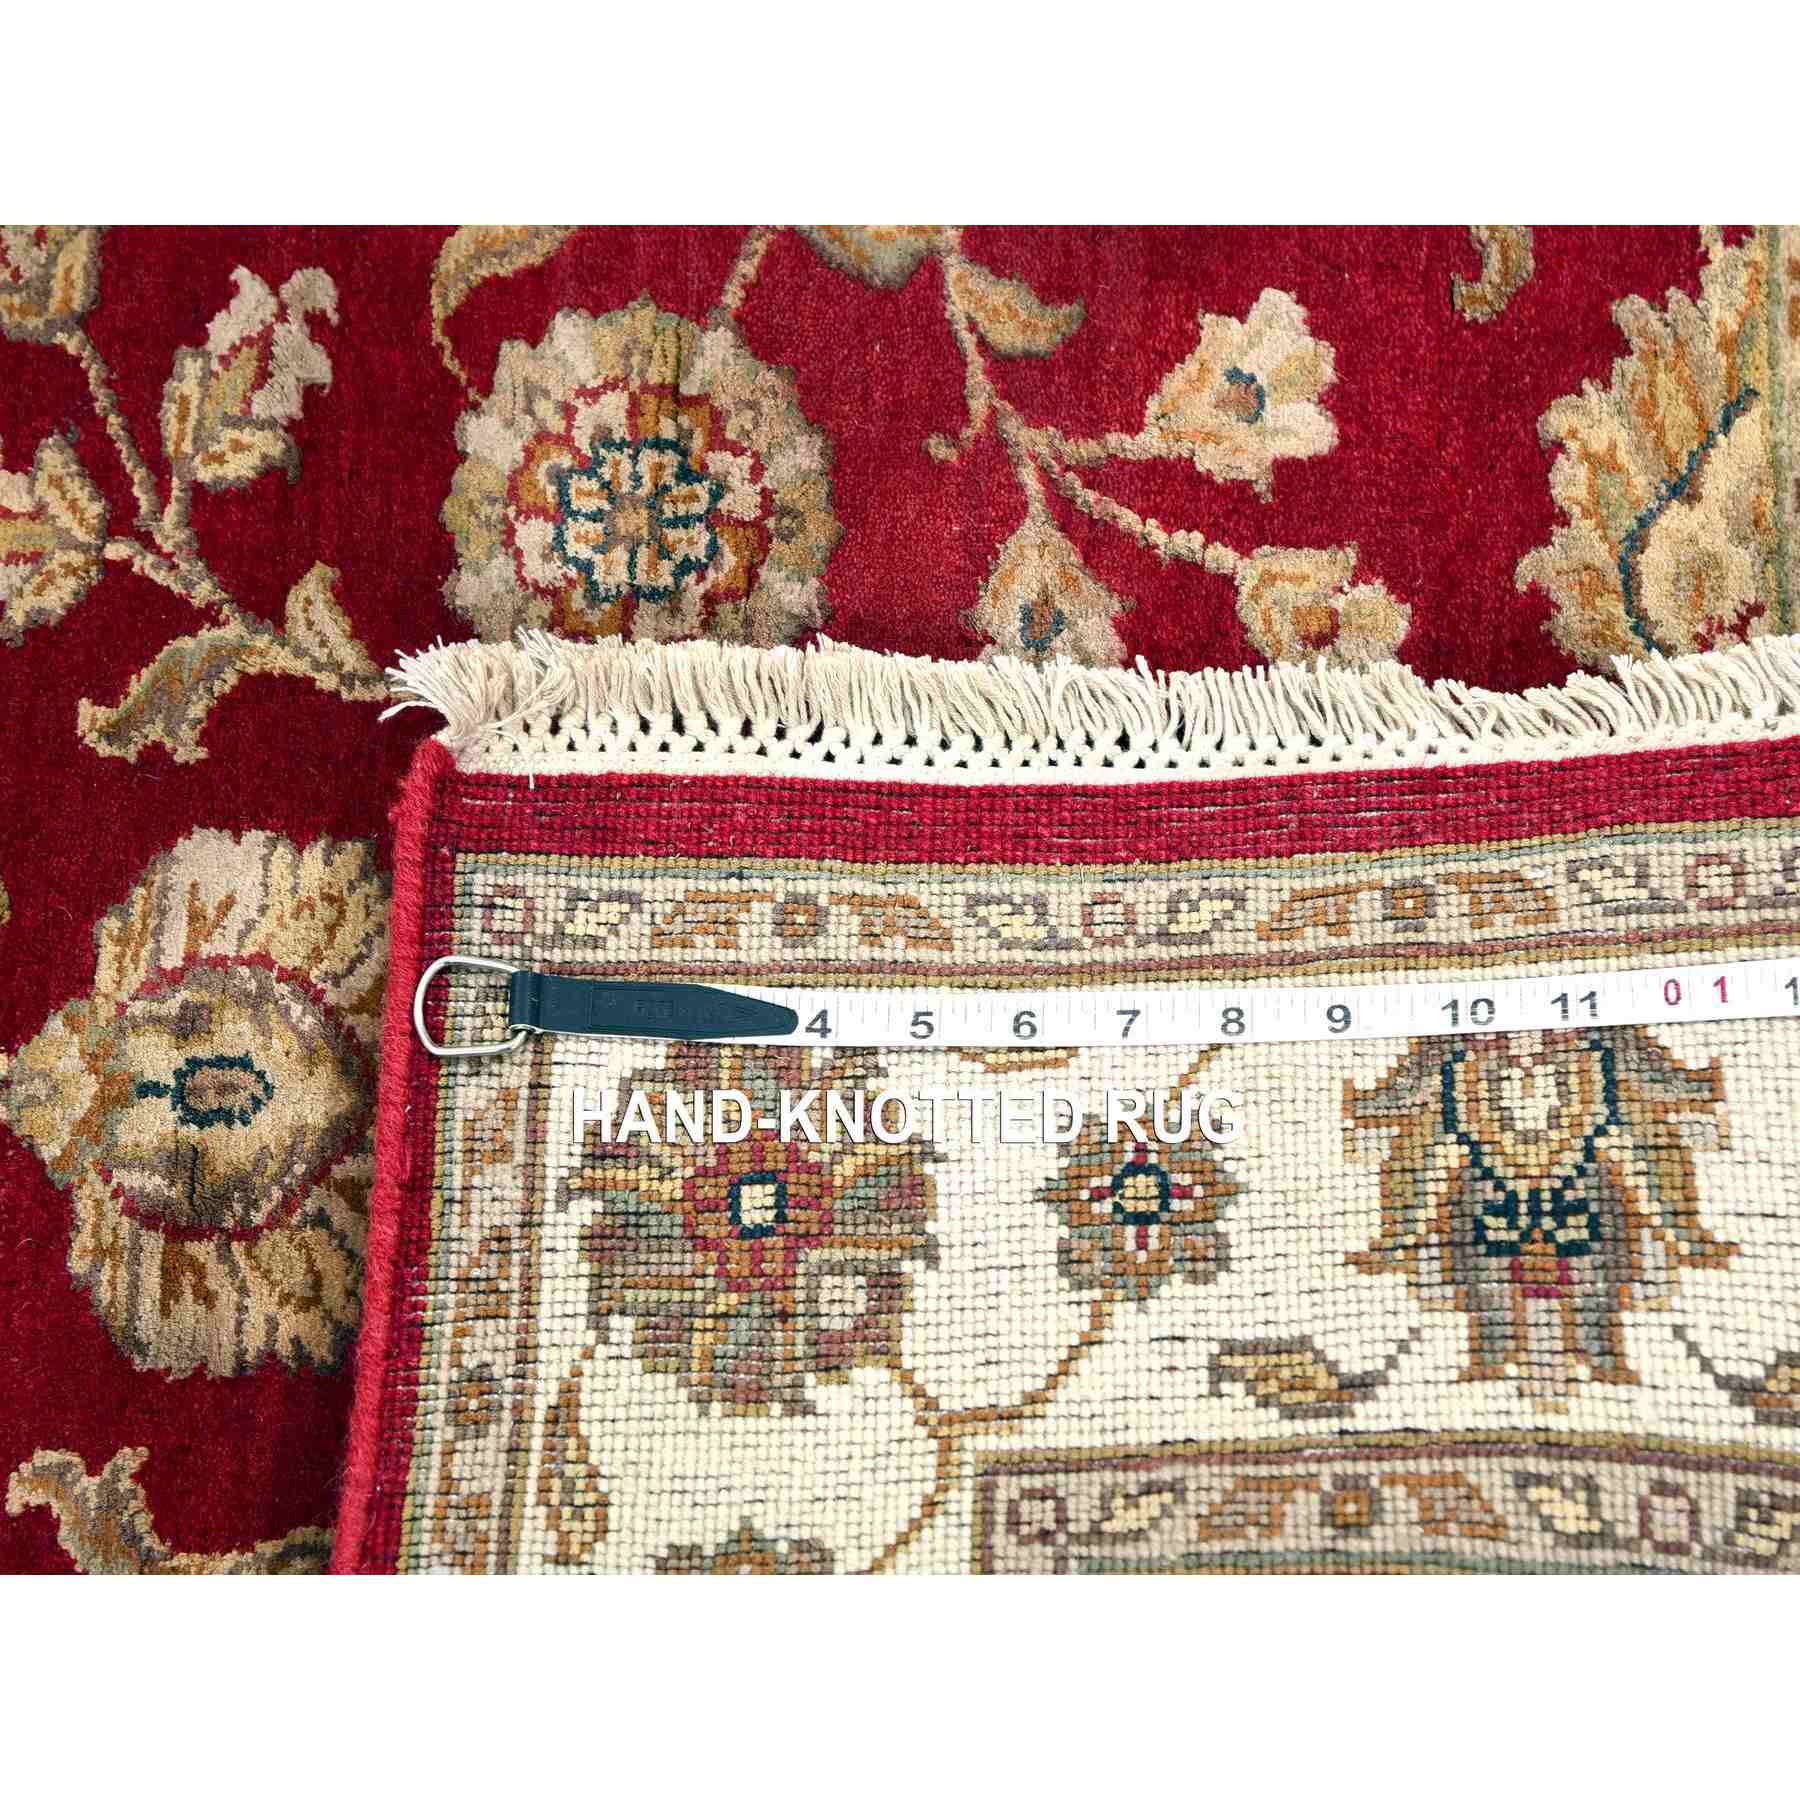 Rajasthan-Hand-Knotted-Rug-377005